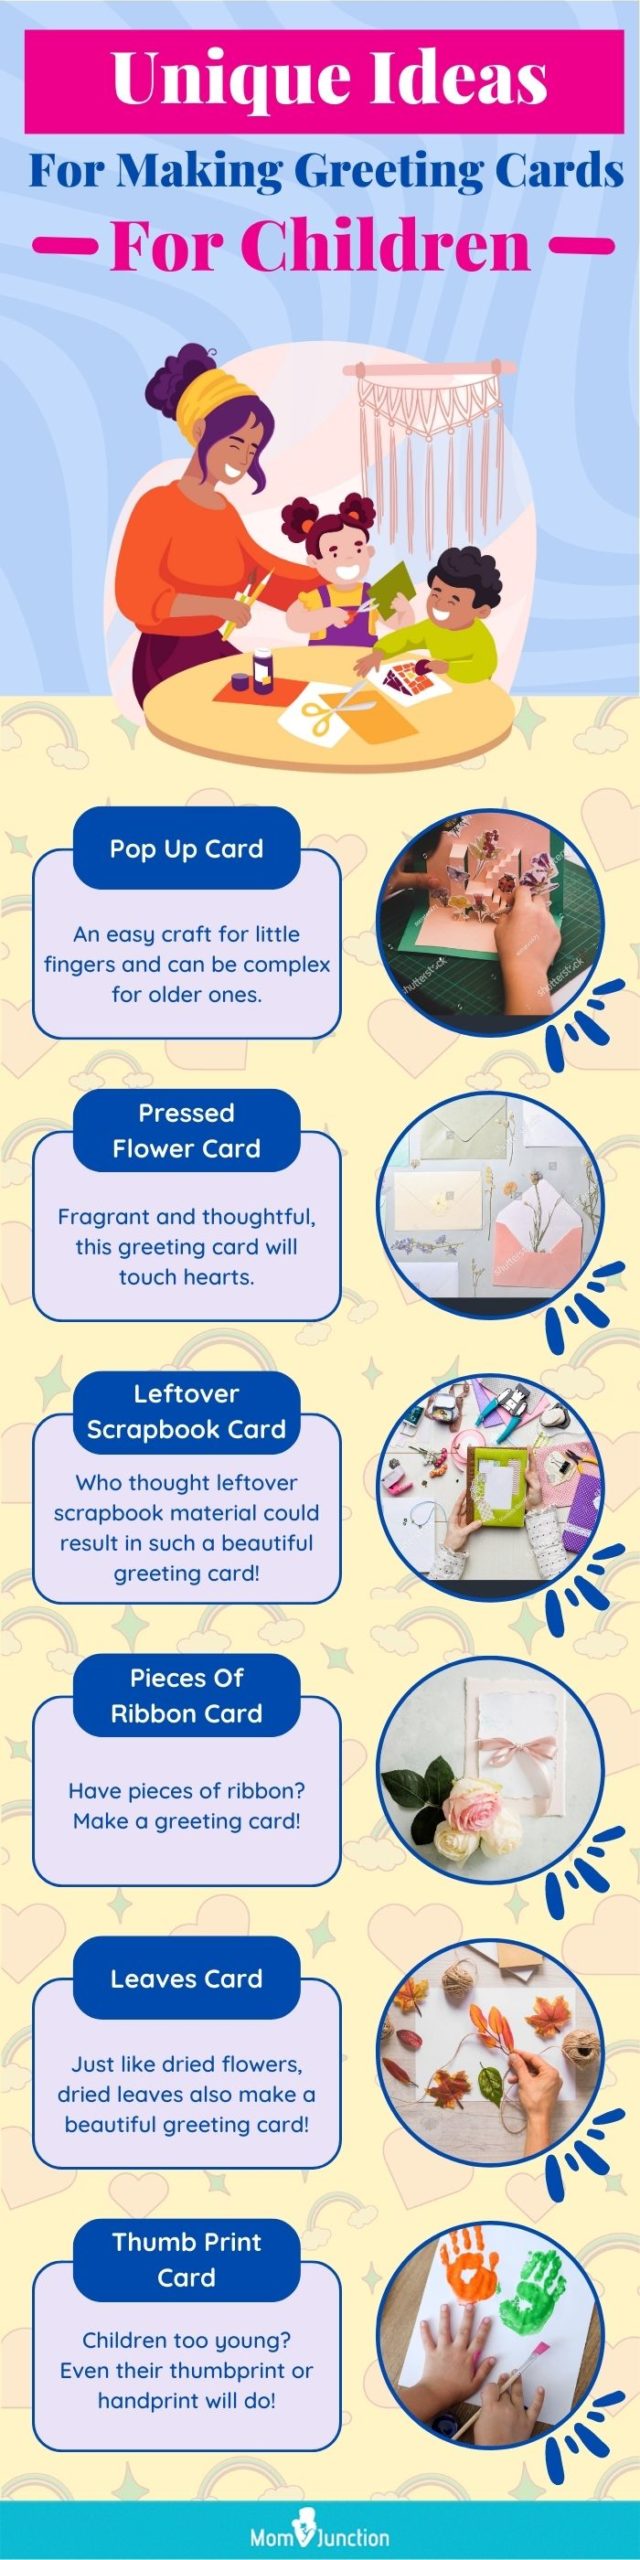 unique ideas for making greeting cards for children (infographic)